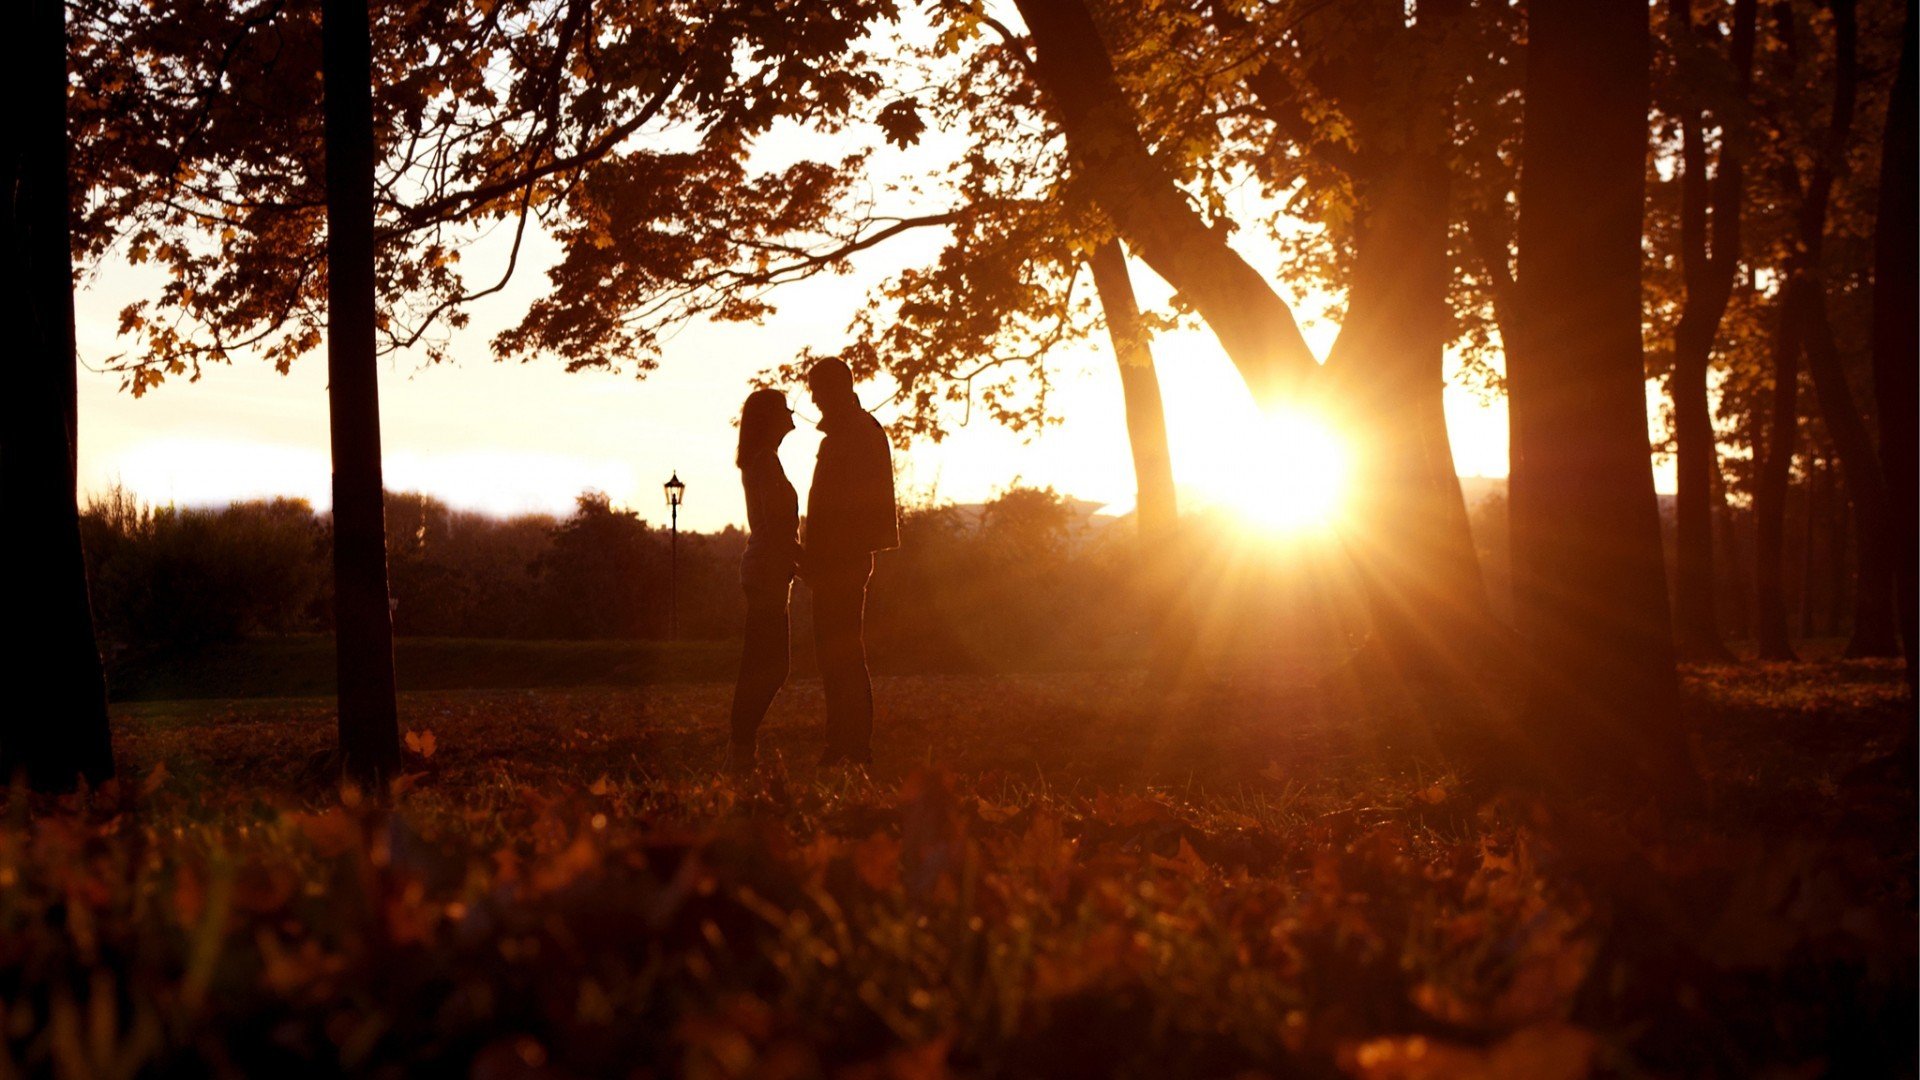 sunset, Trees, Forests, Silhouettes, Couple, Sunlight Wallpaper